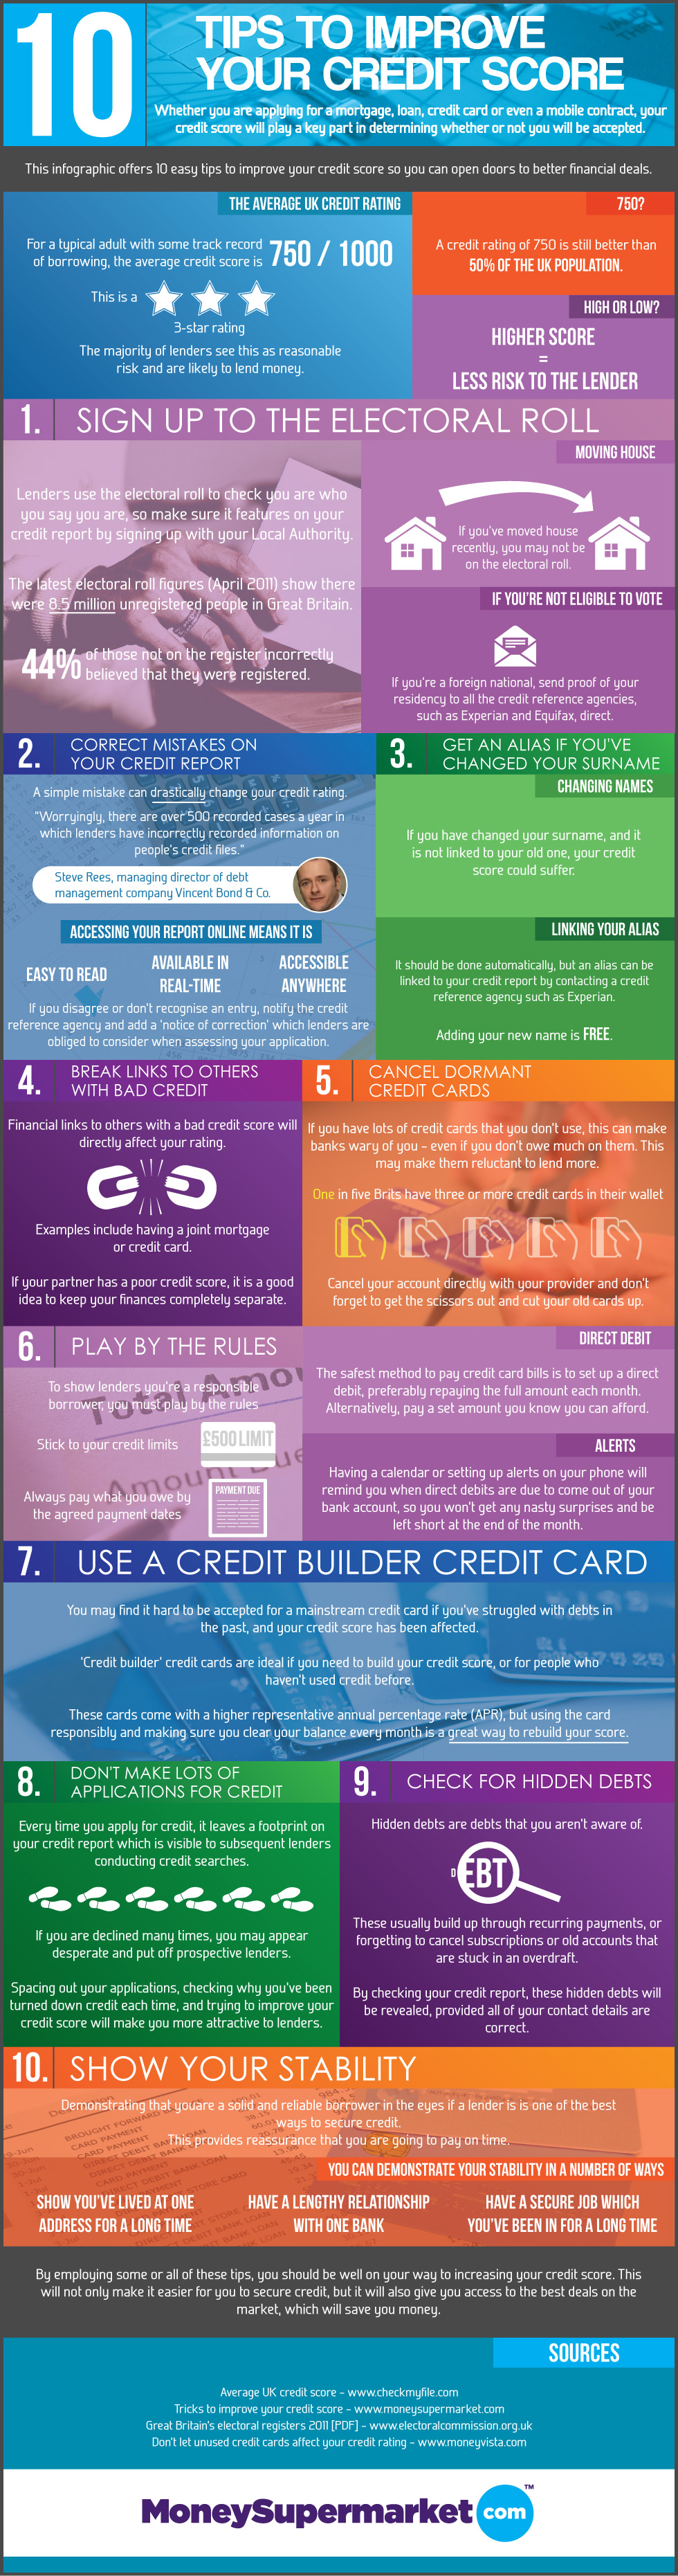 5 Things You Can Do to Better Your Credit Score in 12 Months [Infographic]